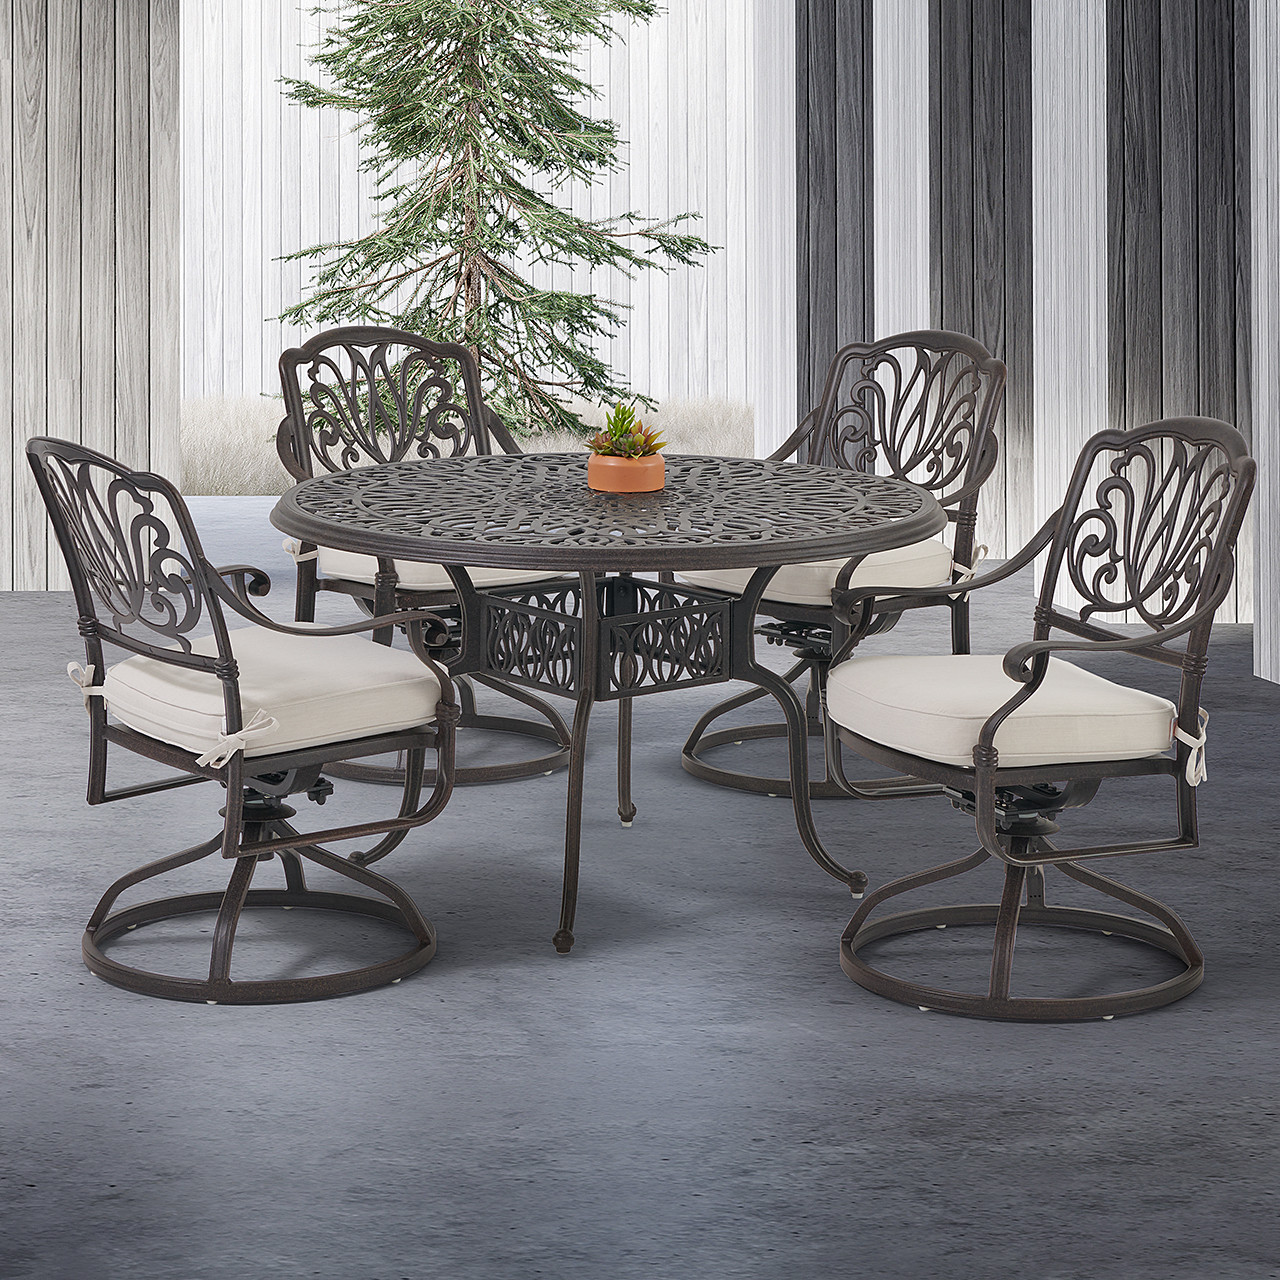 Cadiz Aged Bronze Cast Aluminum with Cushions 5 Piece Swivel Dining Set + 48 in. D Table